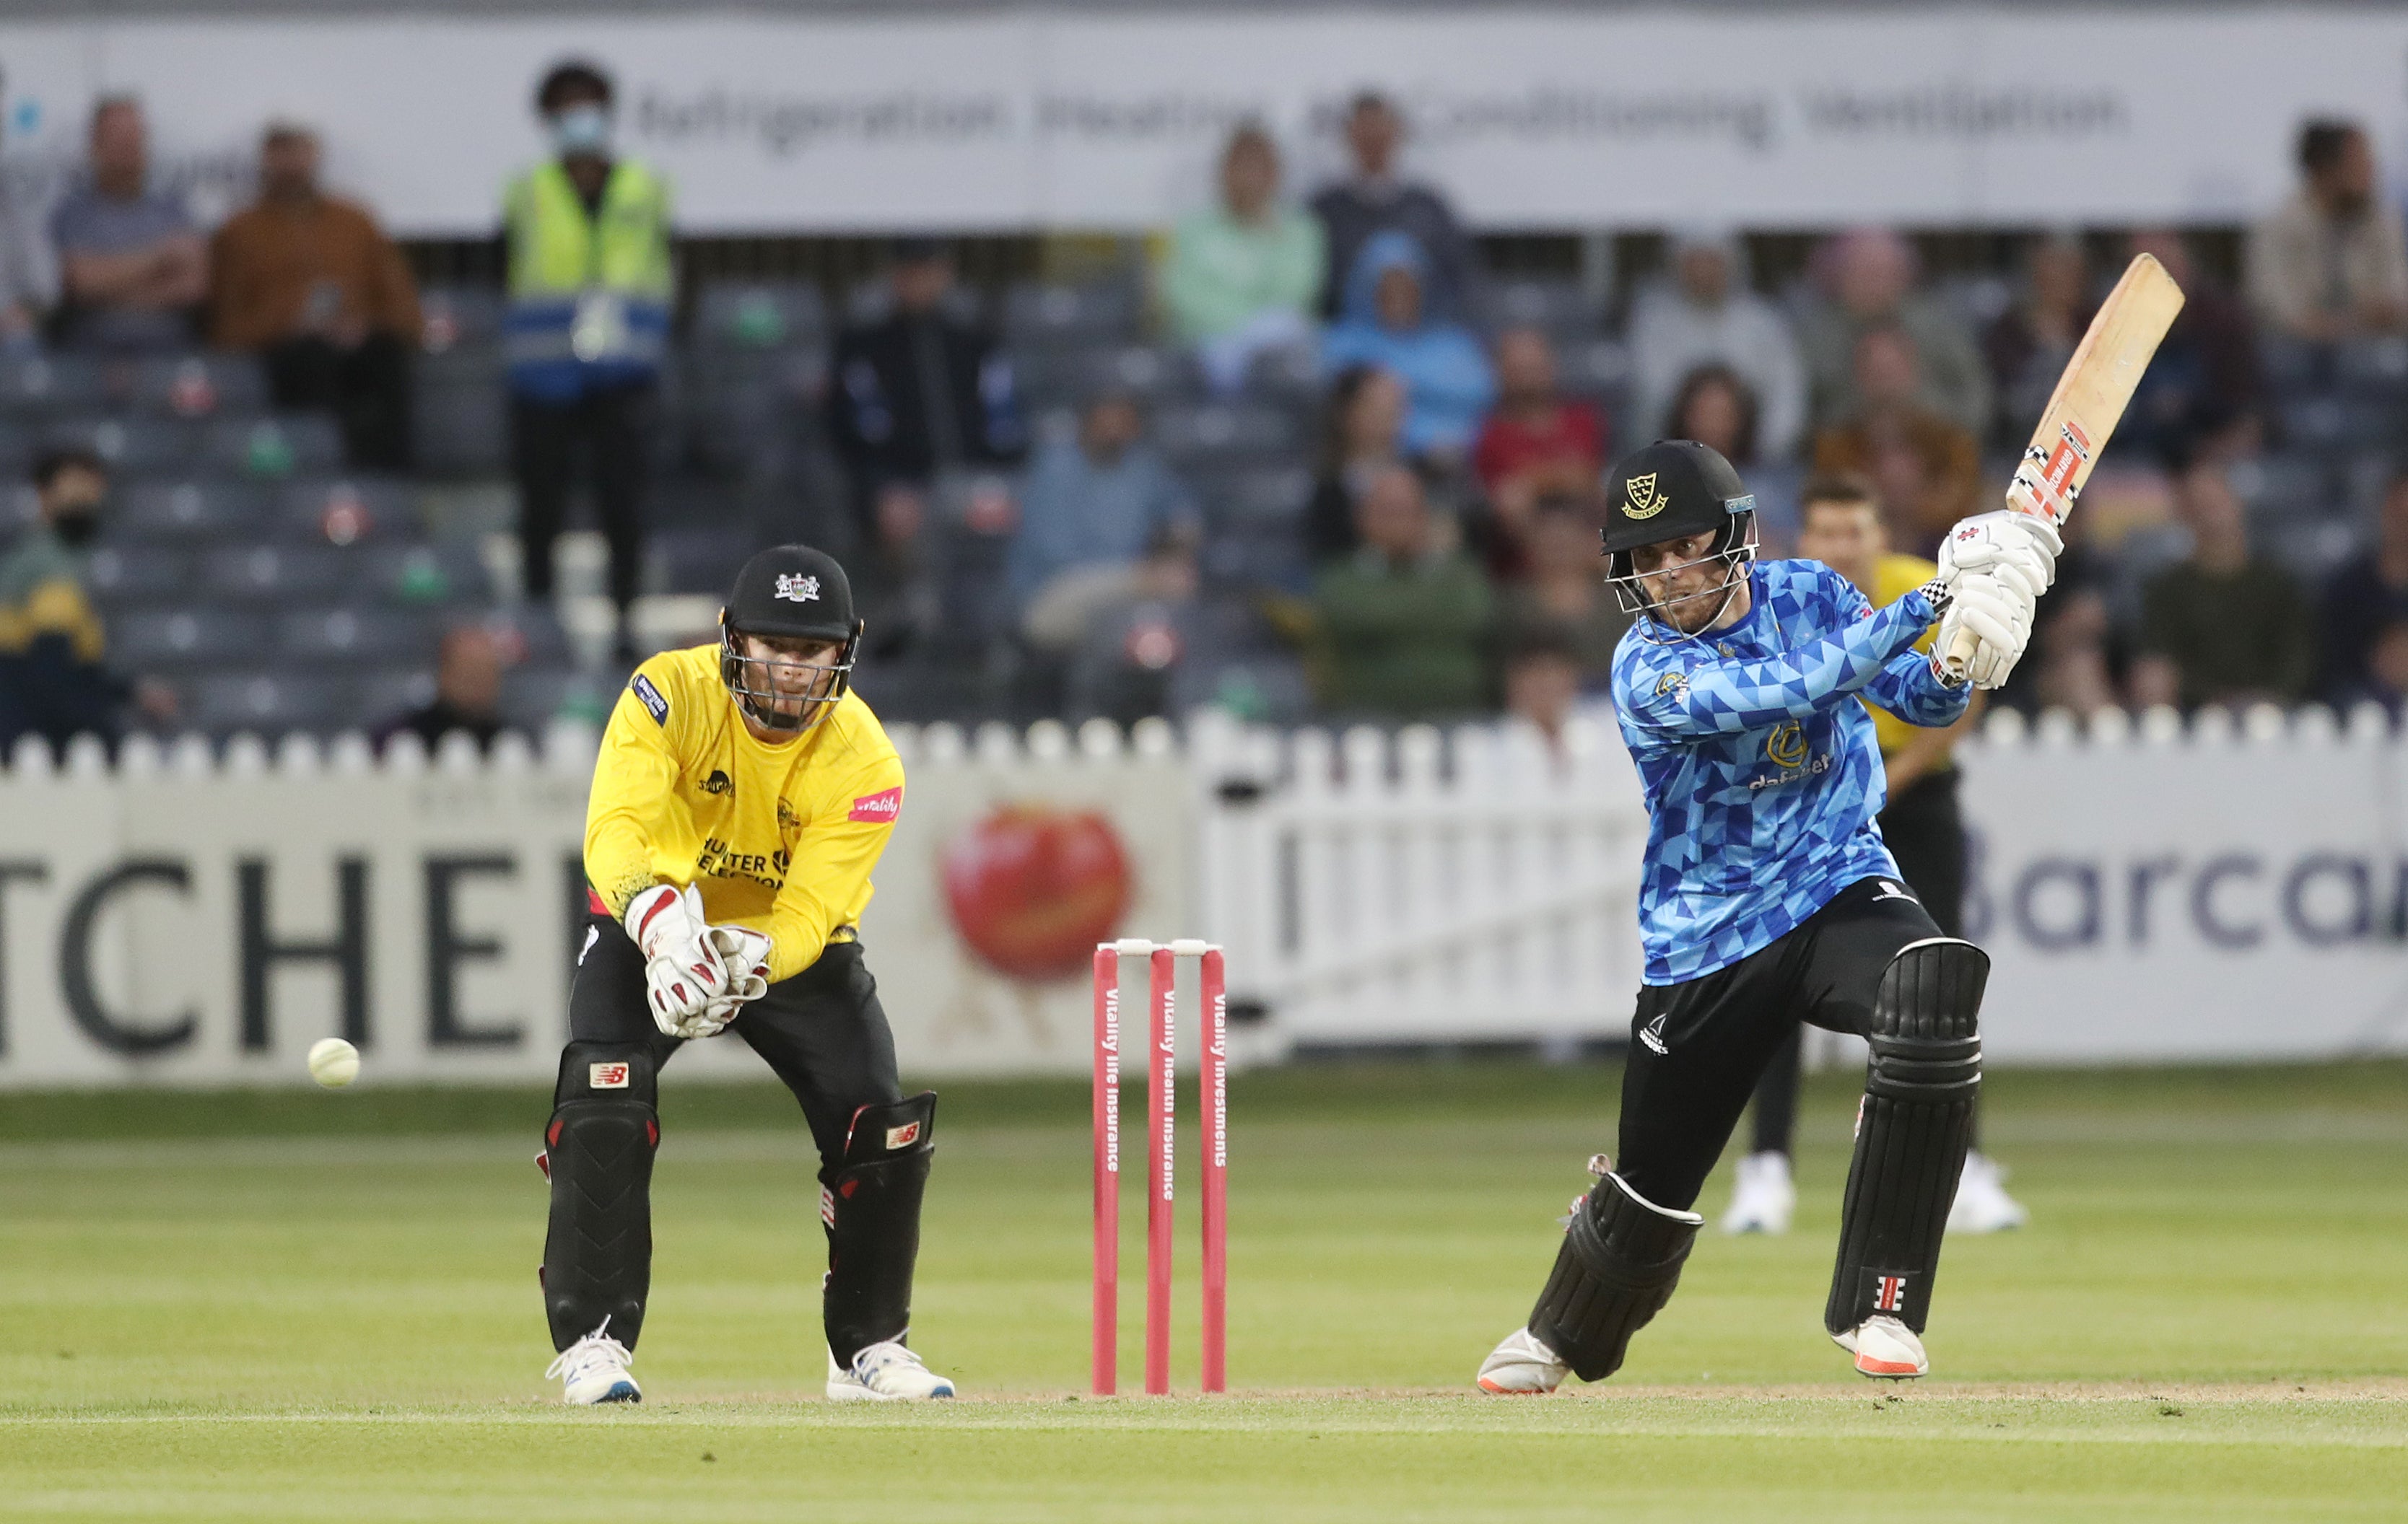 Gloucestershire v Sussex Sharks – Vitality Blast T20 – The Bristol County Ground